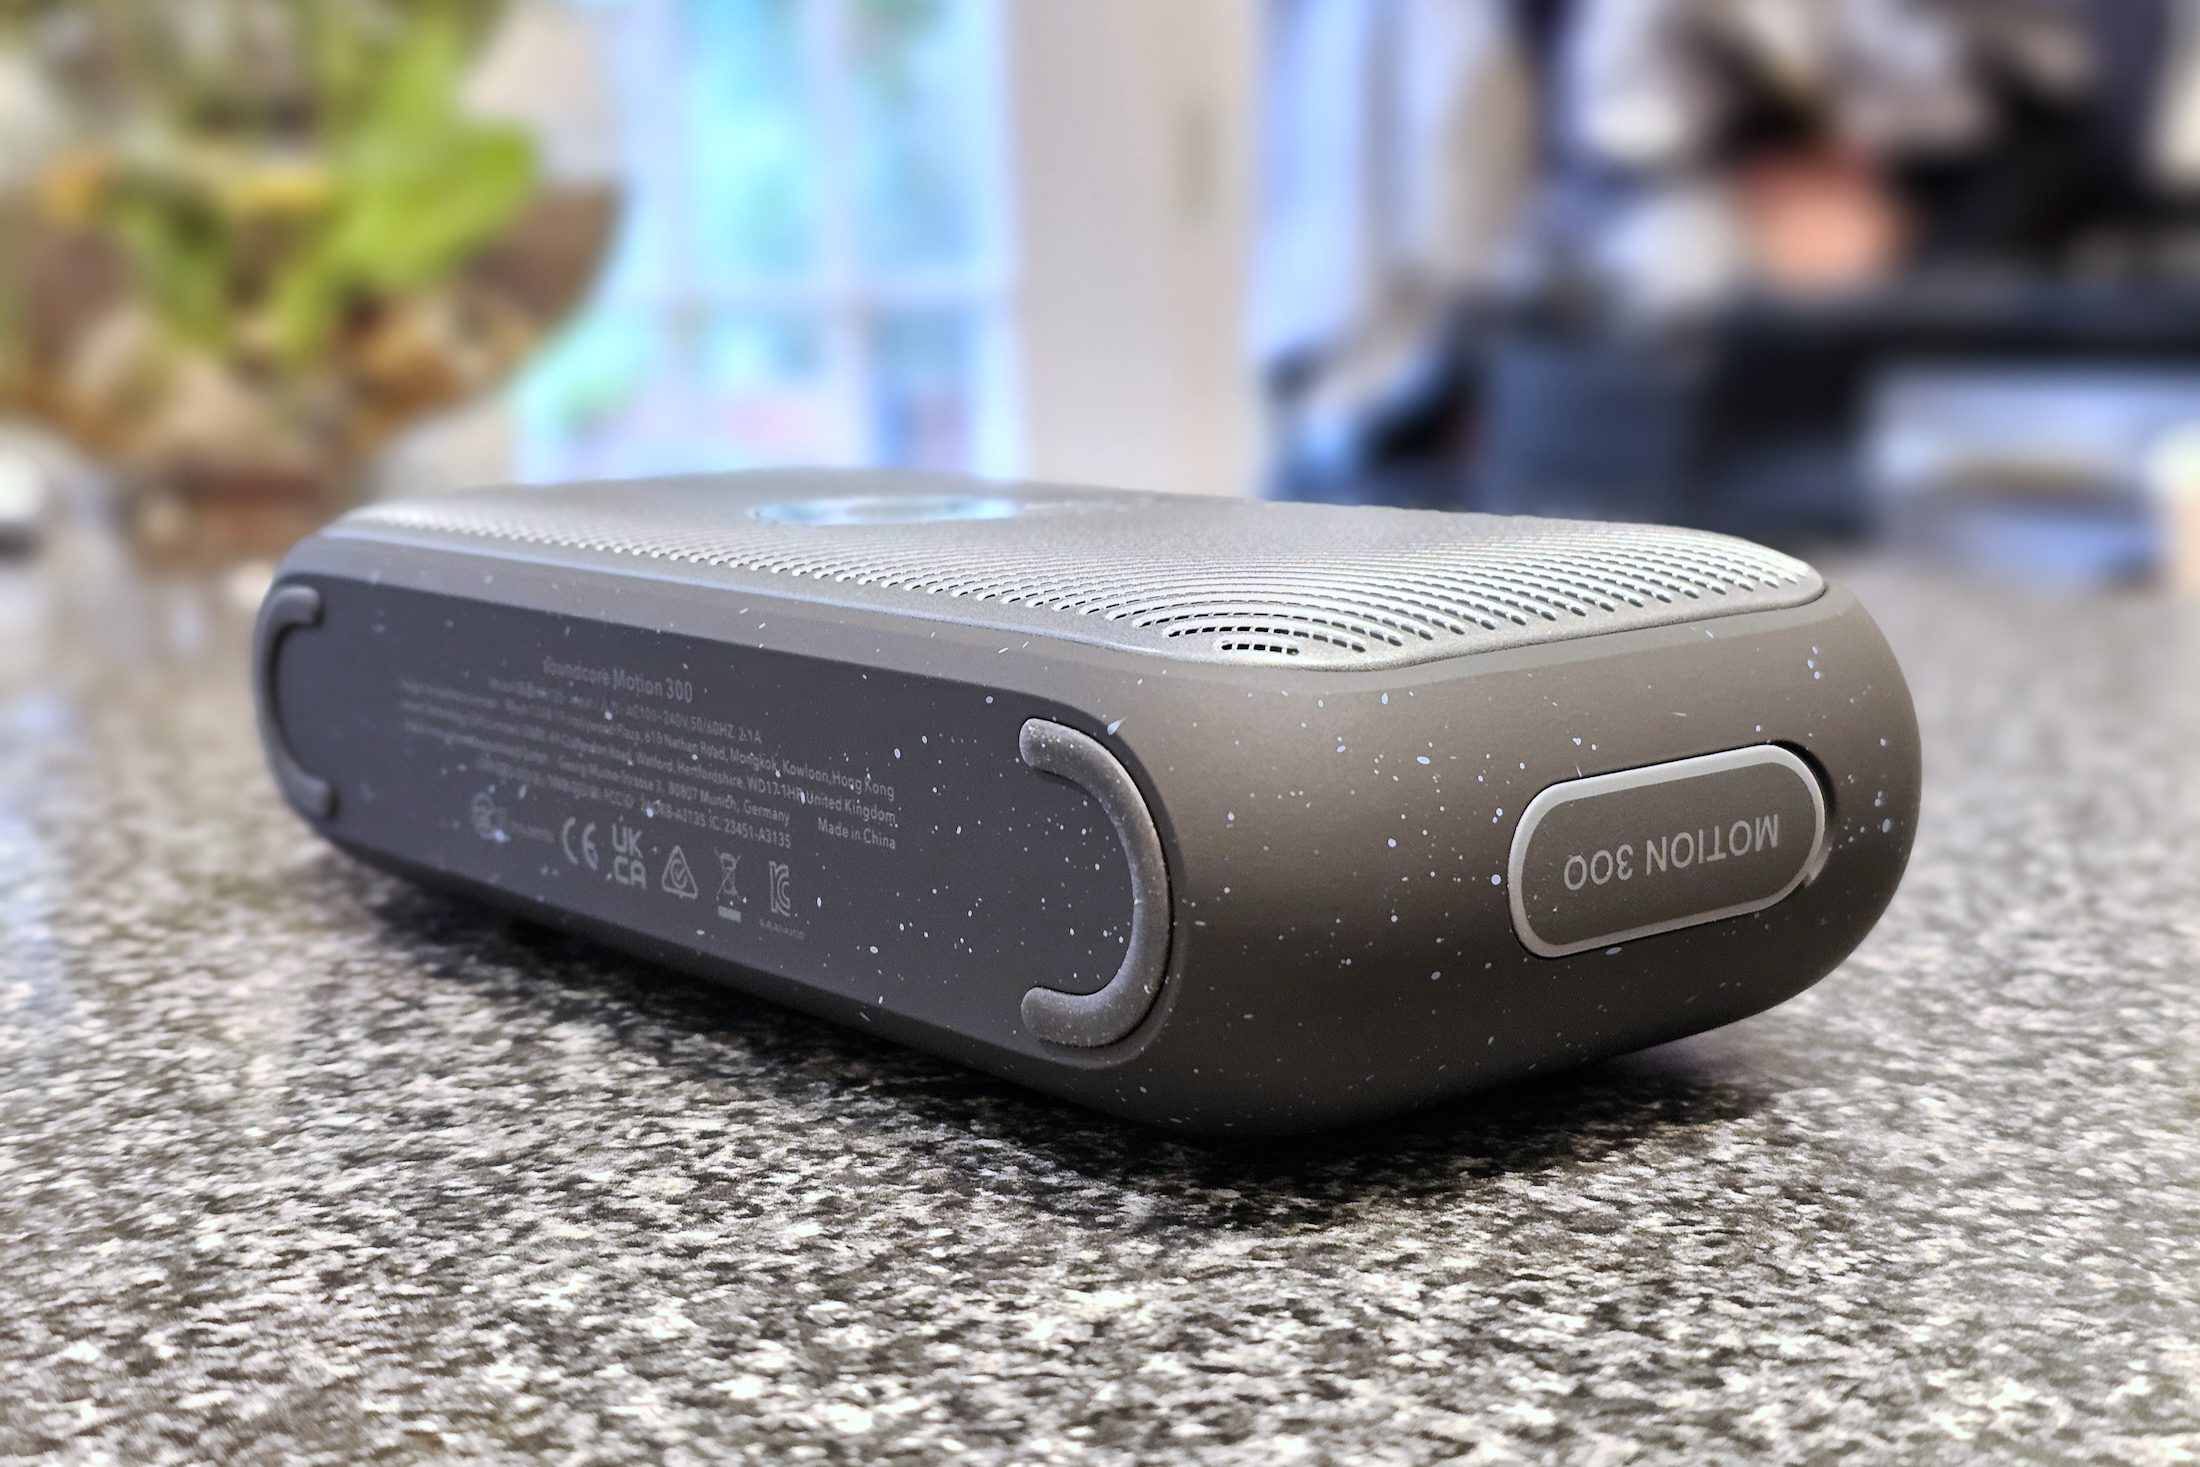 Anker Soundcore Motion 300 Bluetooth Speaker Review: The Price Is Right -  CNET